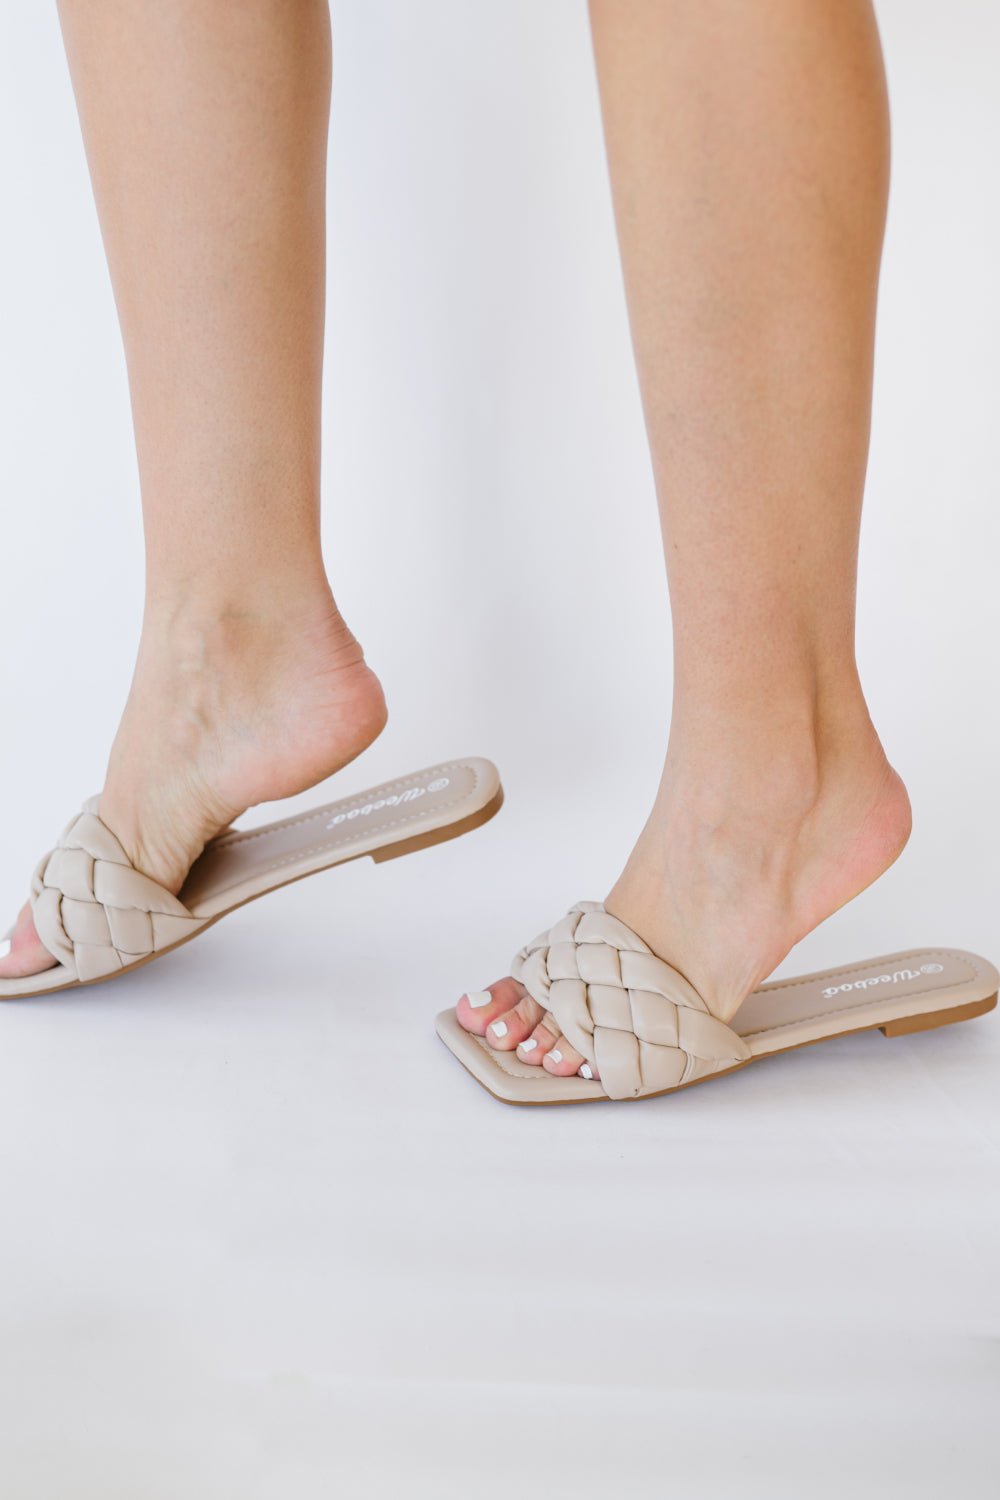 Weeboo Cakewalk Woven Square Toe Slides - Fashion Girl Online Store